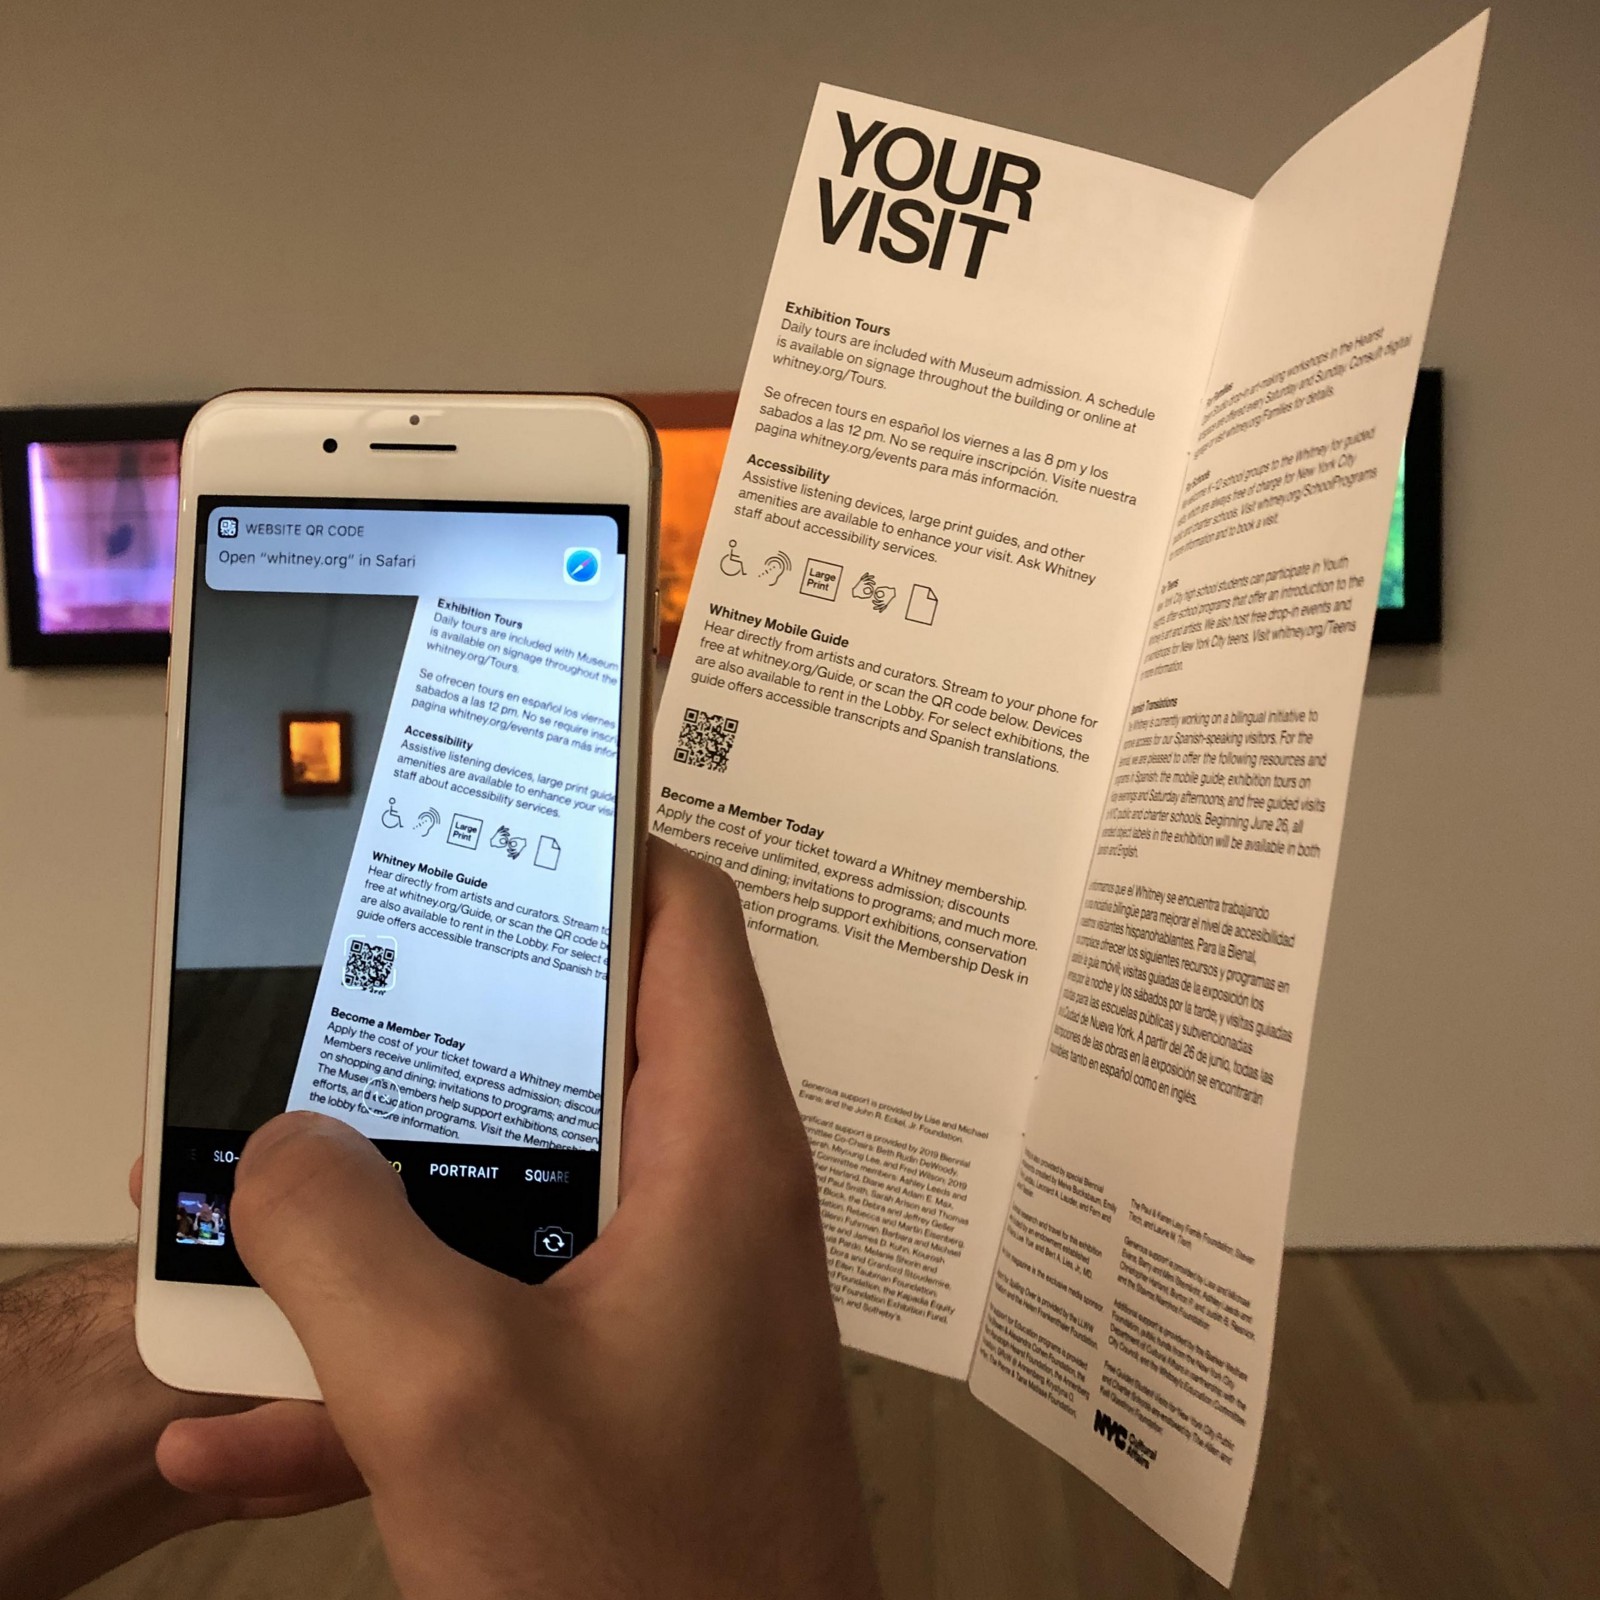 iPhone open to camera scanning a QR code on a paper visitor's guide